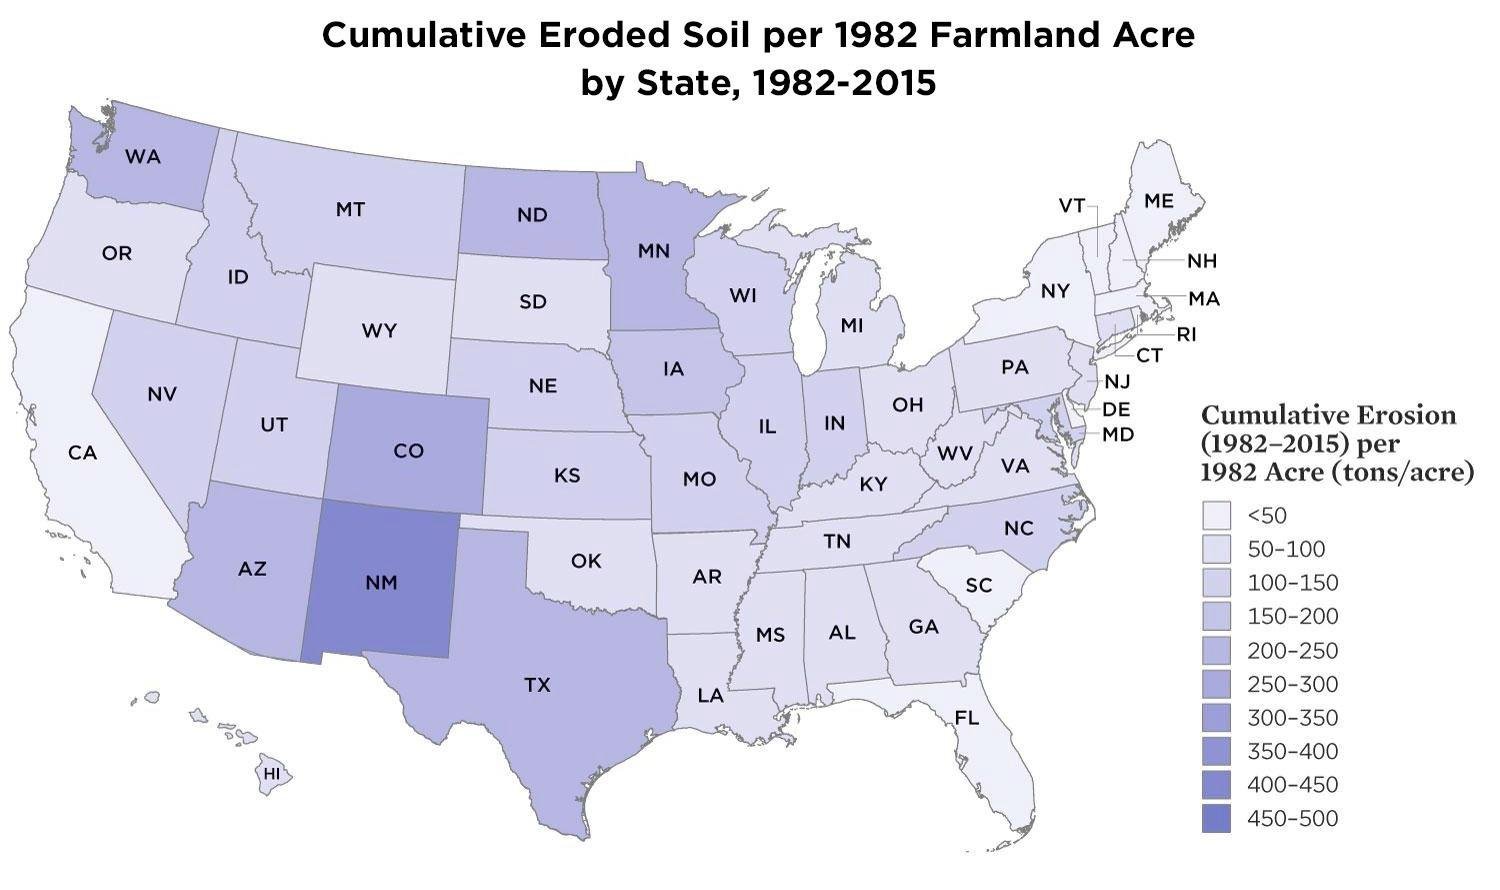 Map showing soil erosion by state from 1982 to 2015